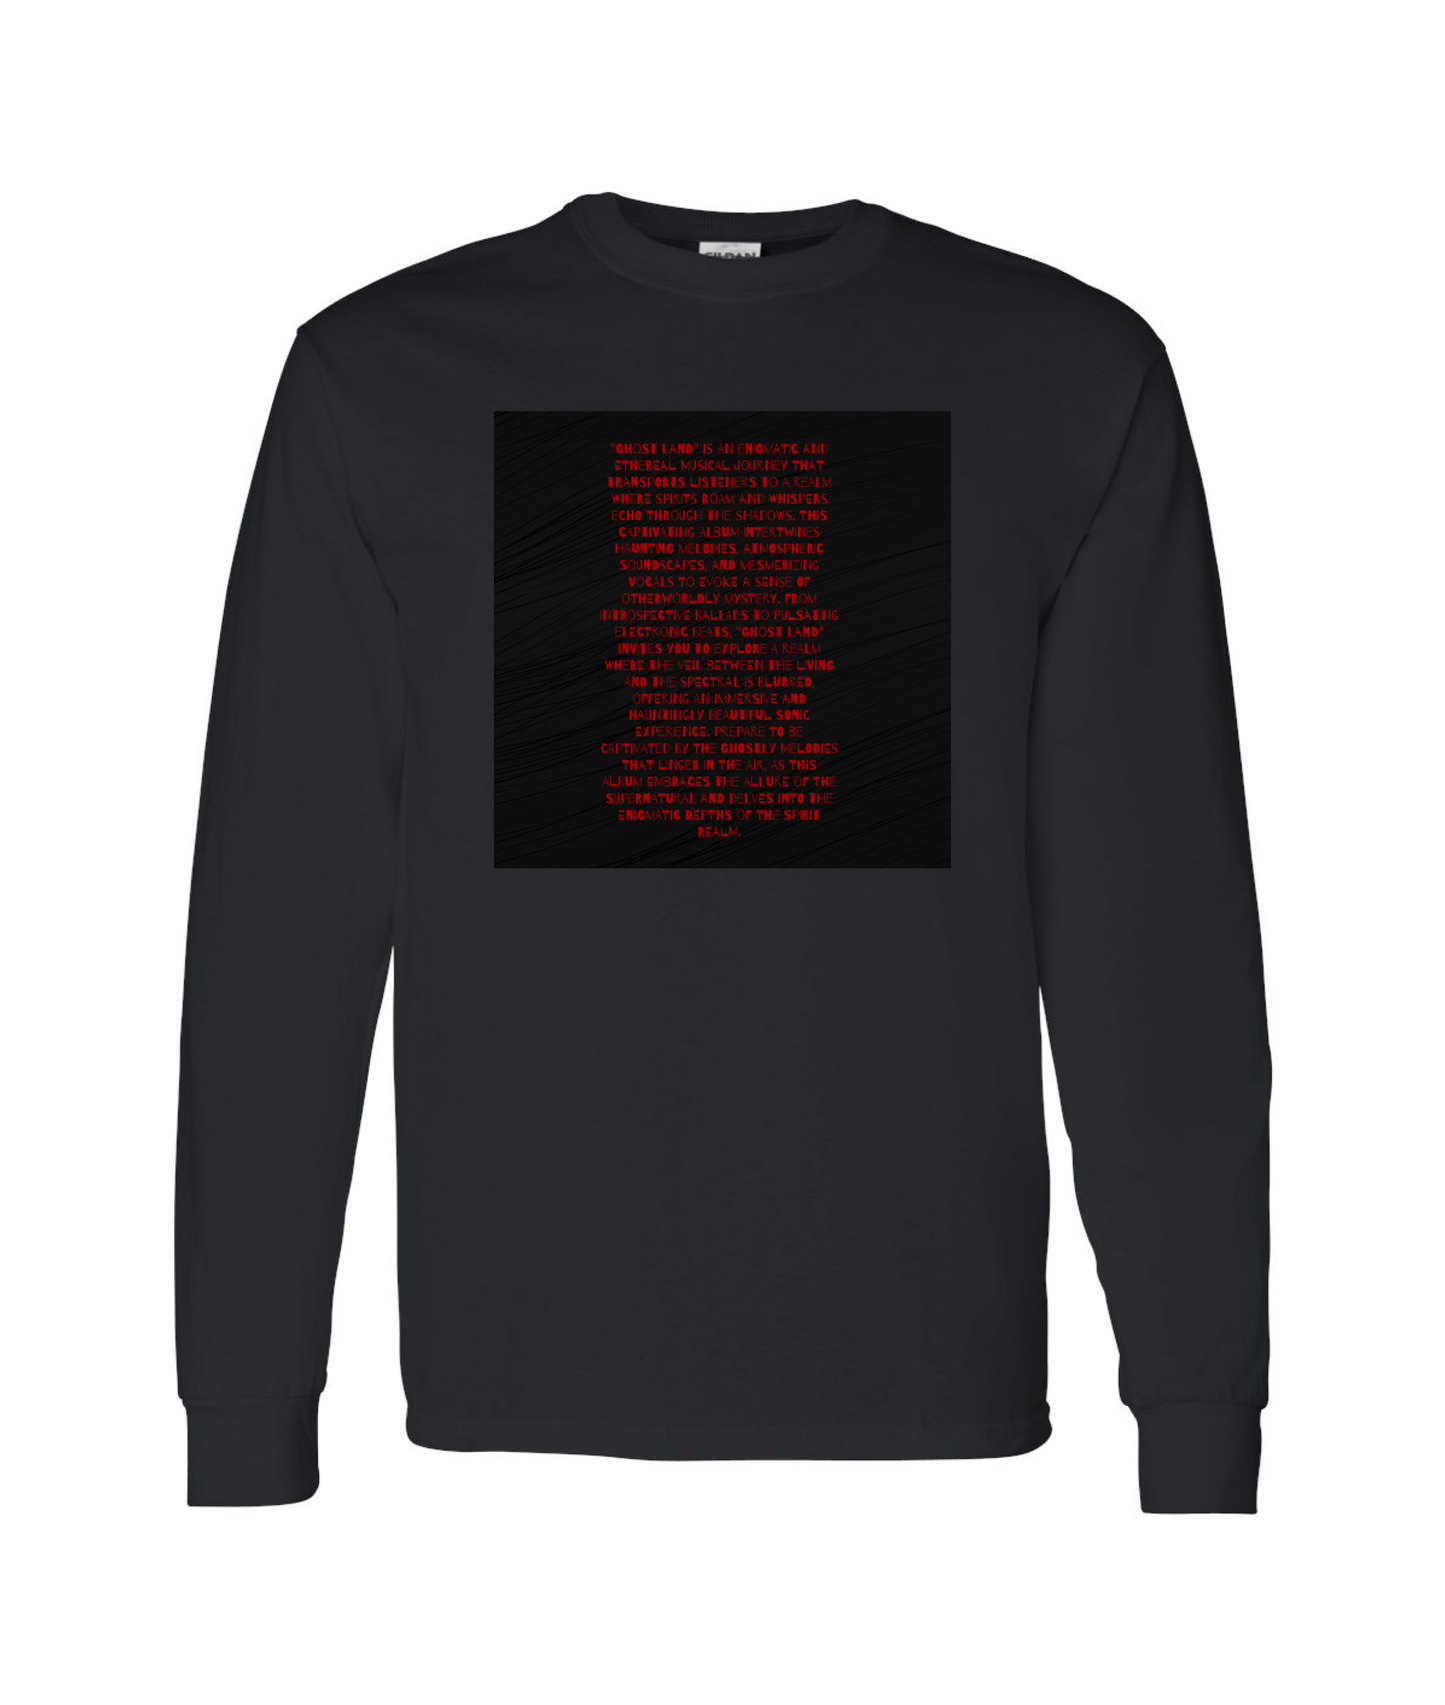 Conc3ept - Quote - Black Long Sleeve T